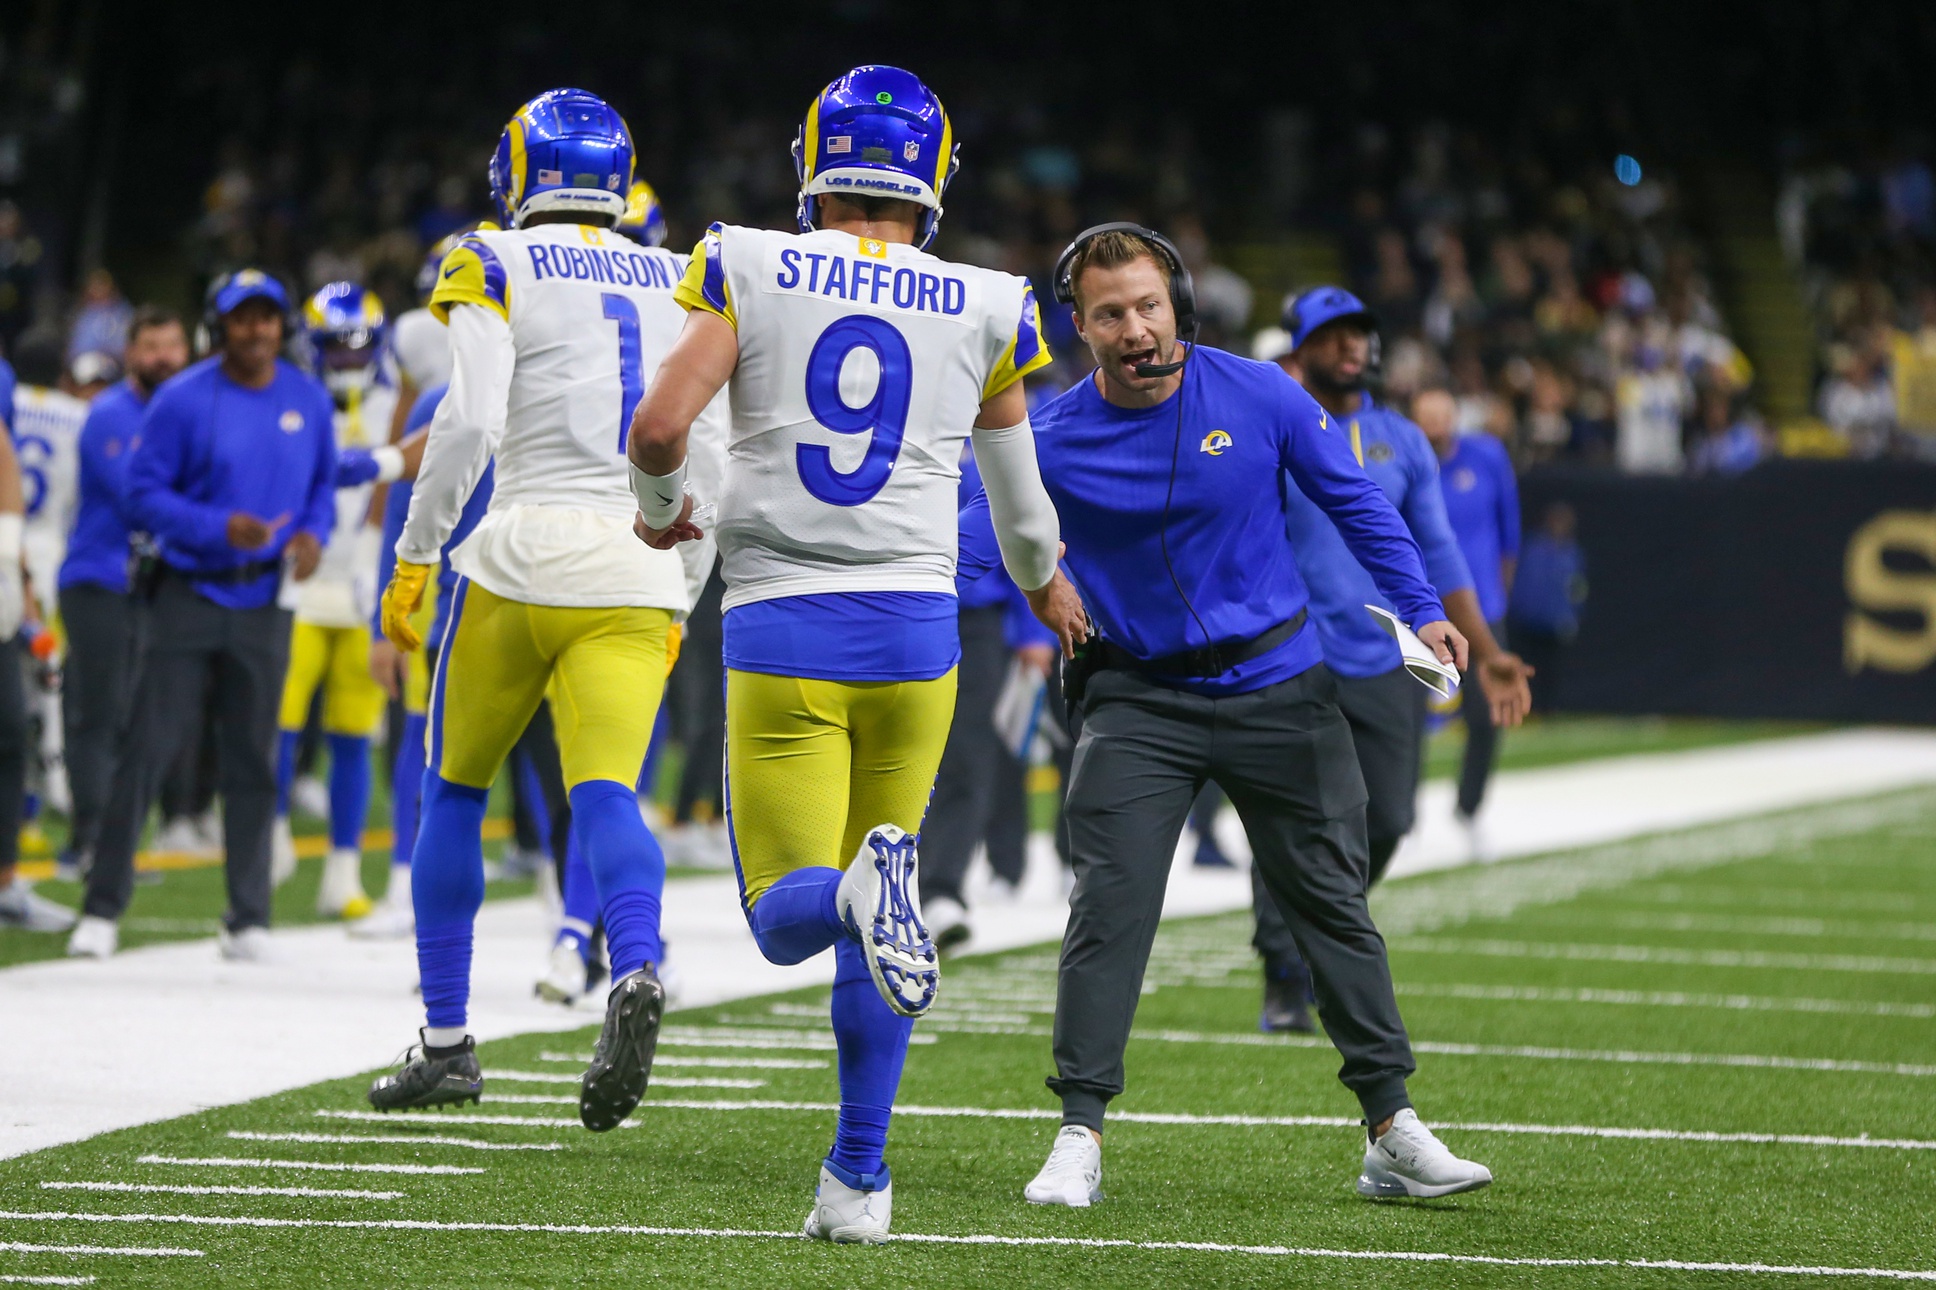 Nov 20, 2022; New Orleans, Louisiana, USA; Los Angeles Rams head coach Sean McVay congratulates quarterback Matthew Stafford (9) after a touchdown pass in the second quarter against the New Orleans Saints at the Caesars Superdome. Mandatory Credit: Chuck Cook-USA TODAY Sports

